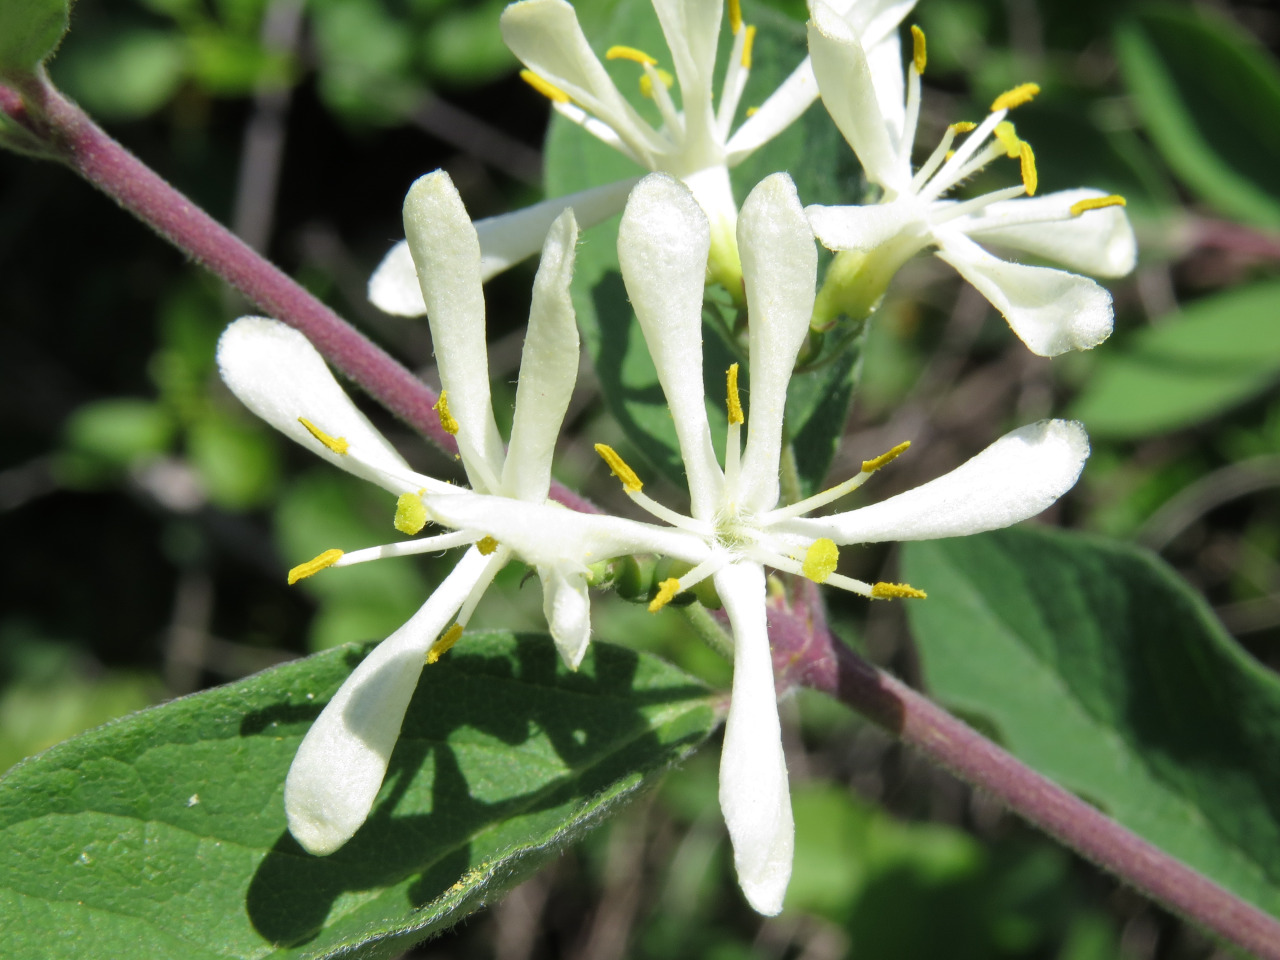 Japanese Honeysuckle (https://en.wikipedia.org/wiki/Lonicera_japonica) grows these white flowers which fill the air around the plant with a sweet, honey-like smell to attract bees